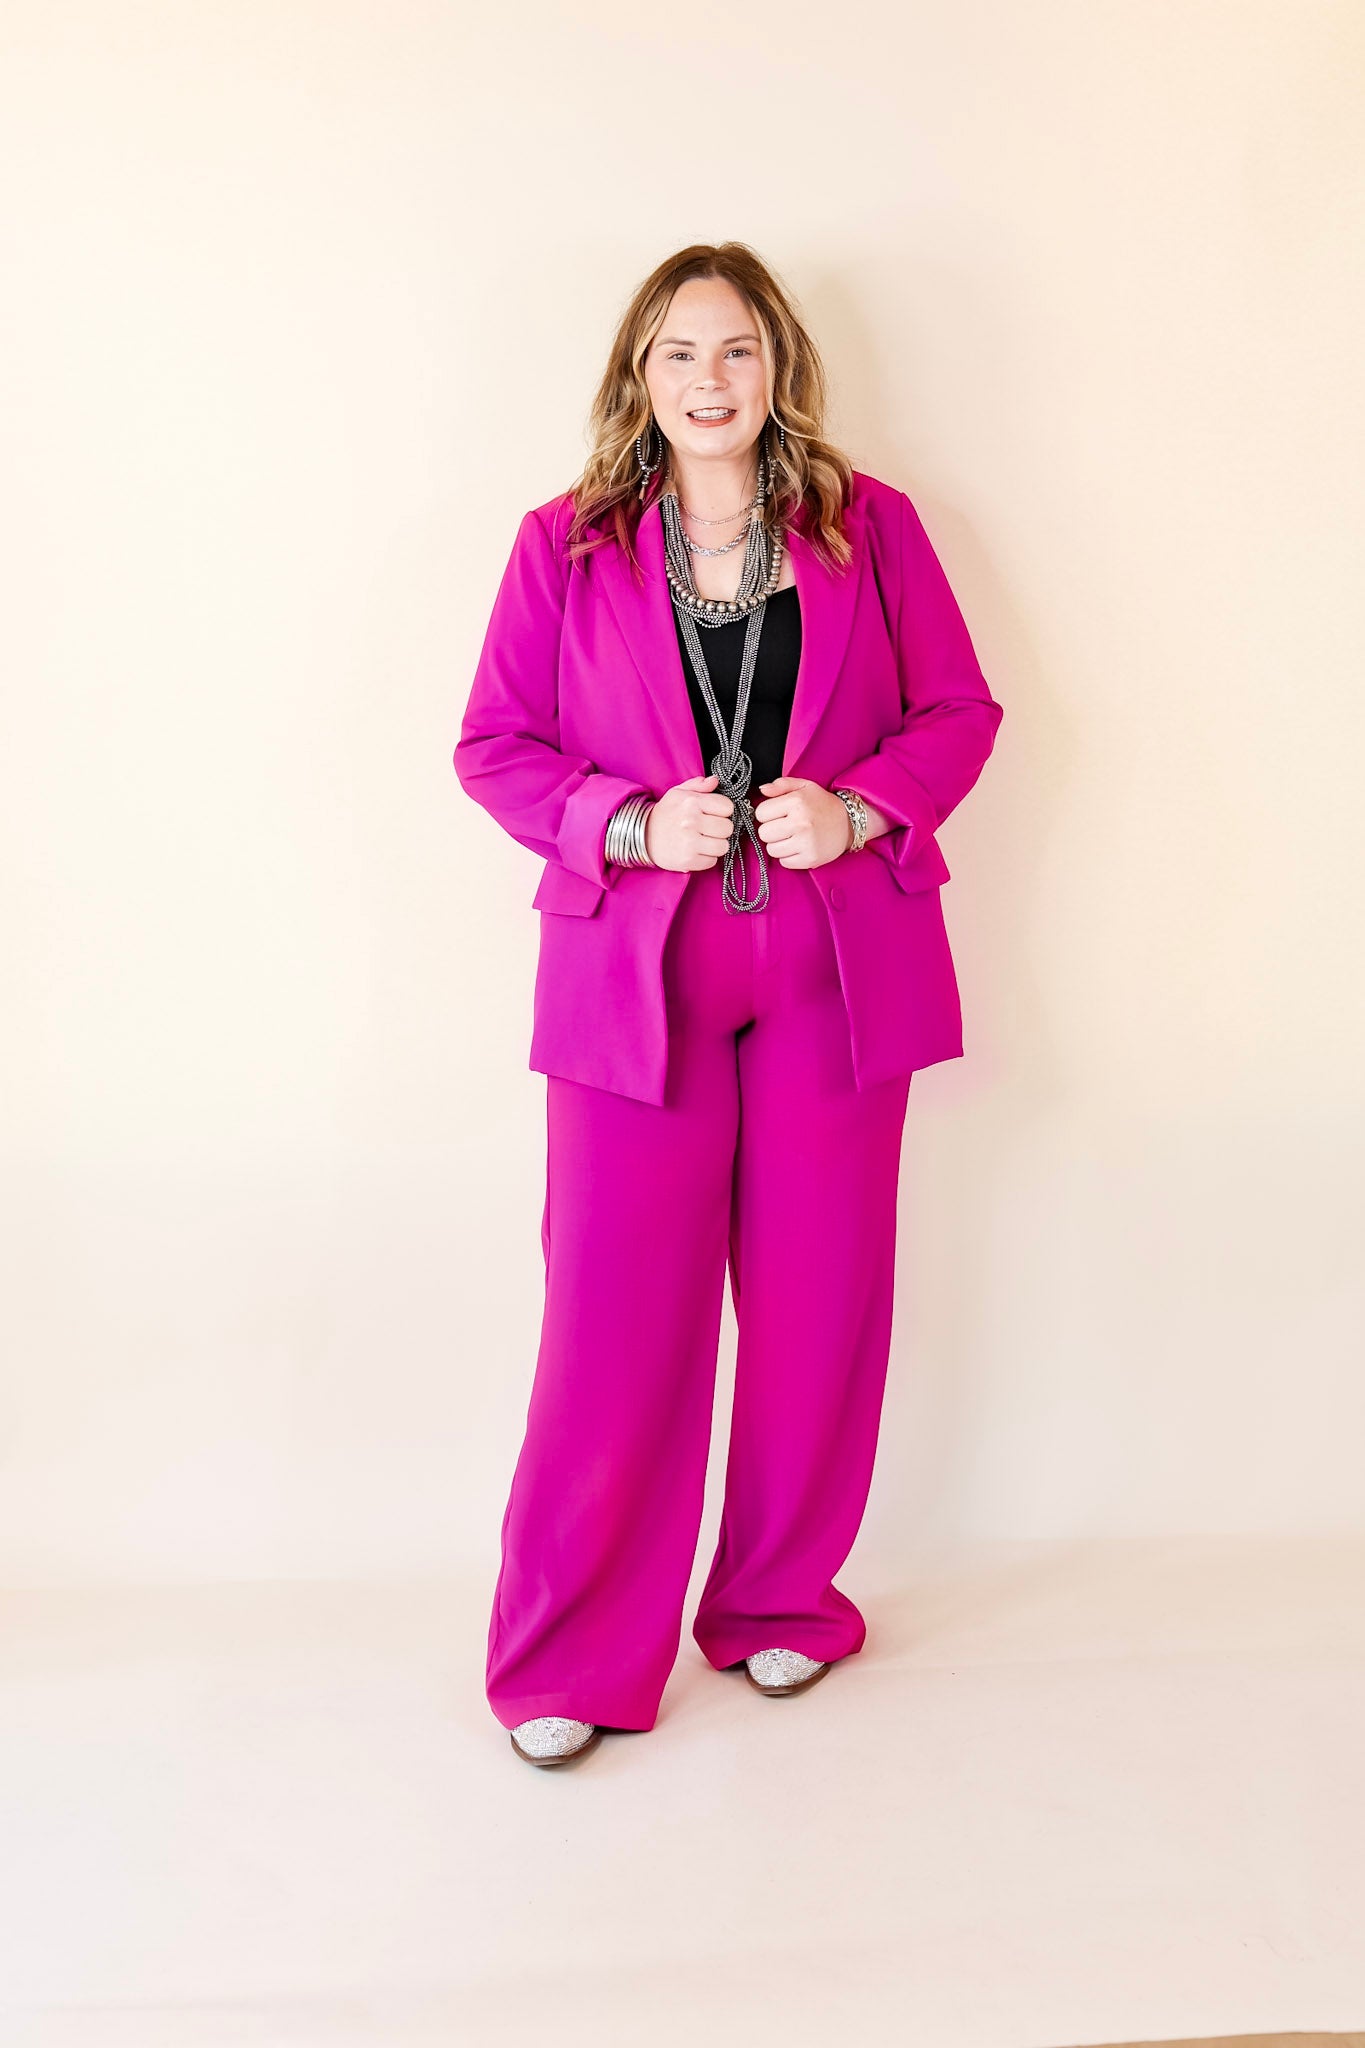 Modern Marvel Trouser Pants in Magenta Pink - Giddy Up Glamour Boutique